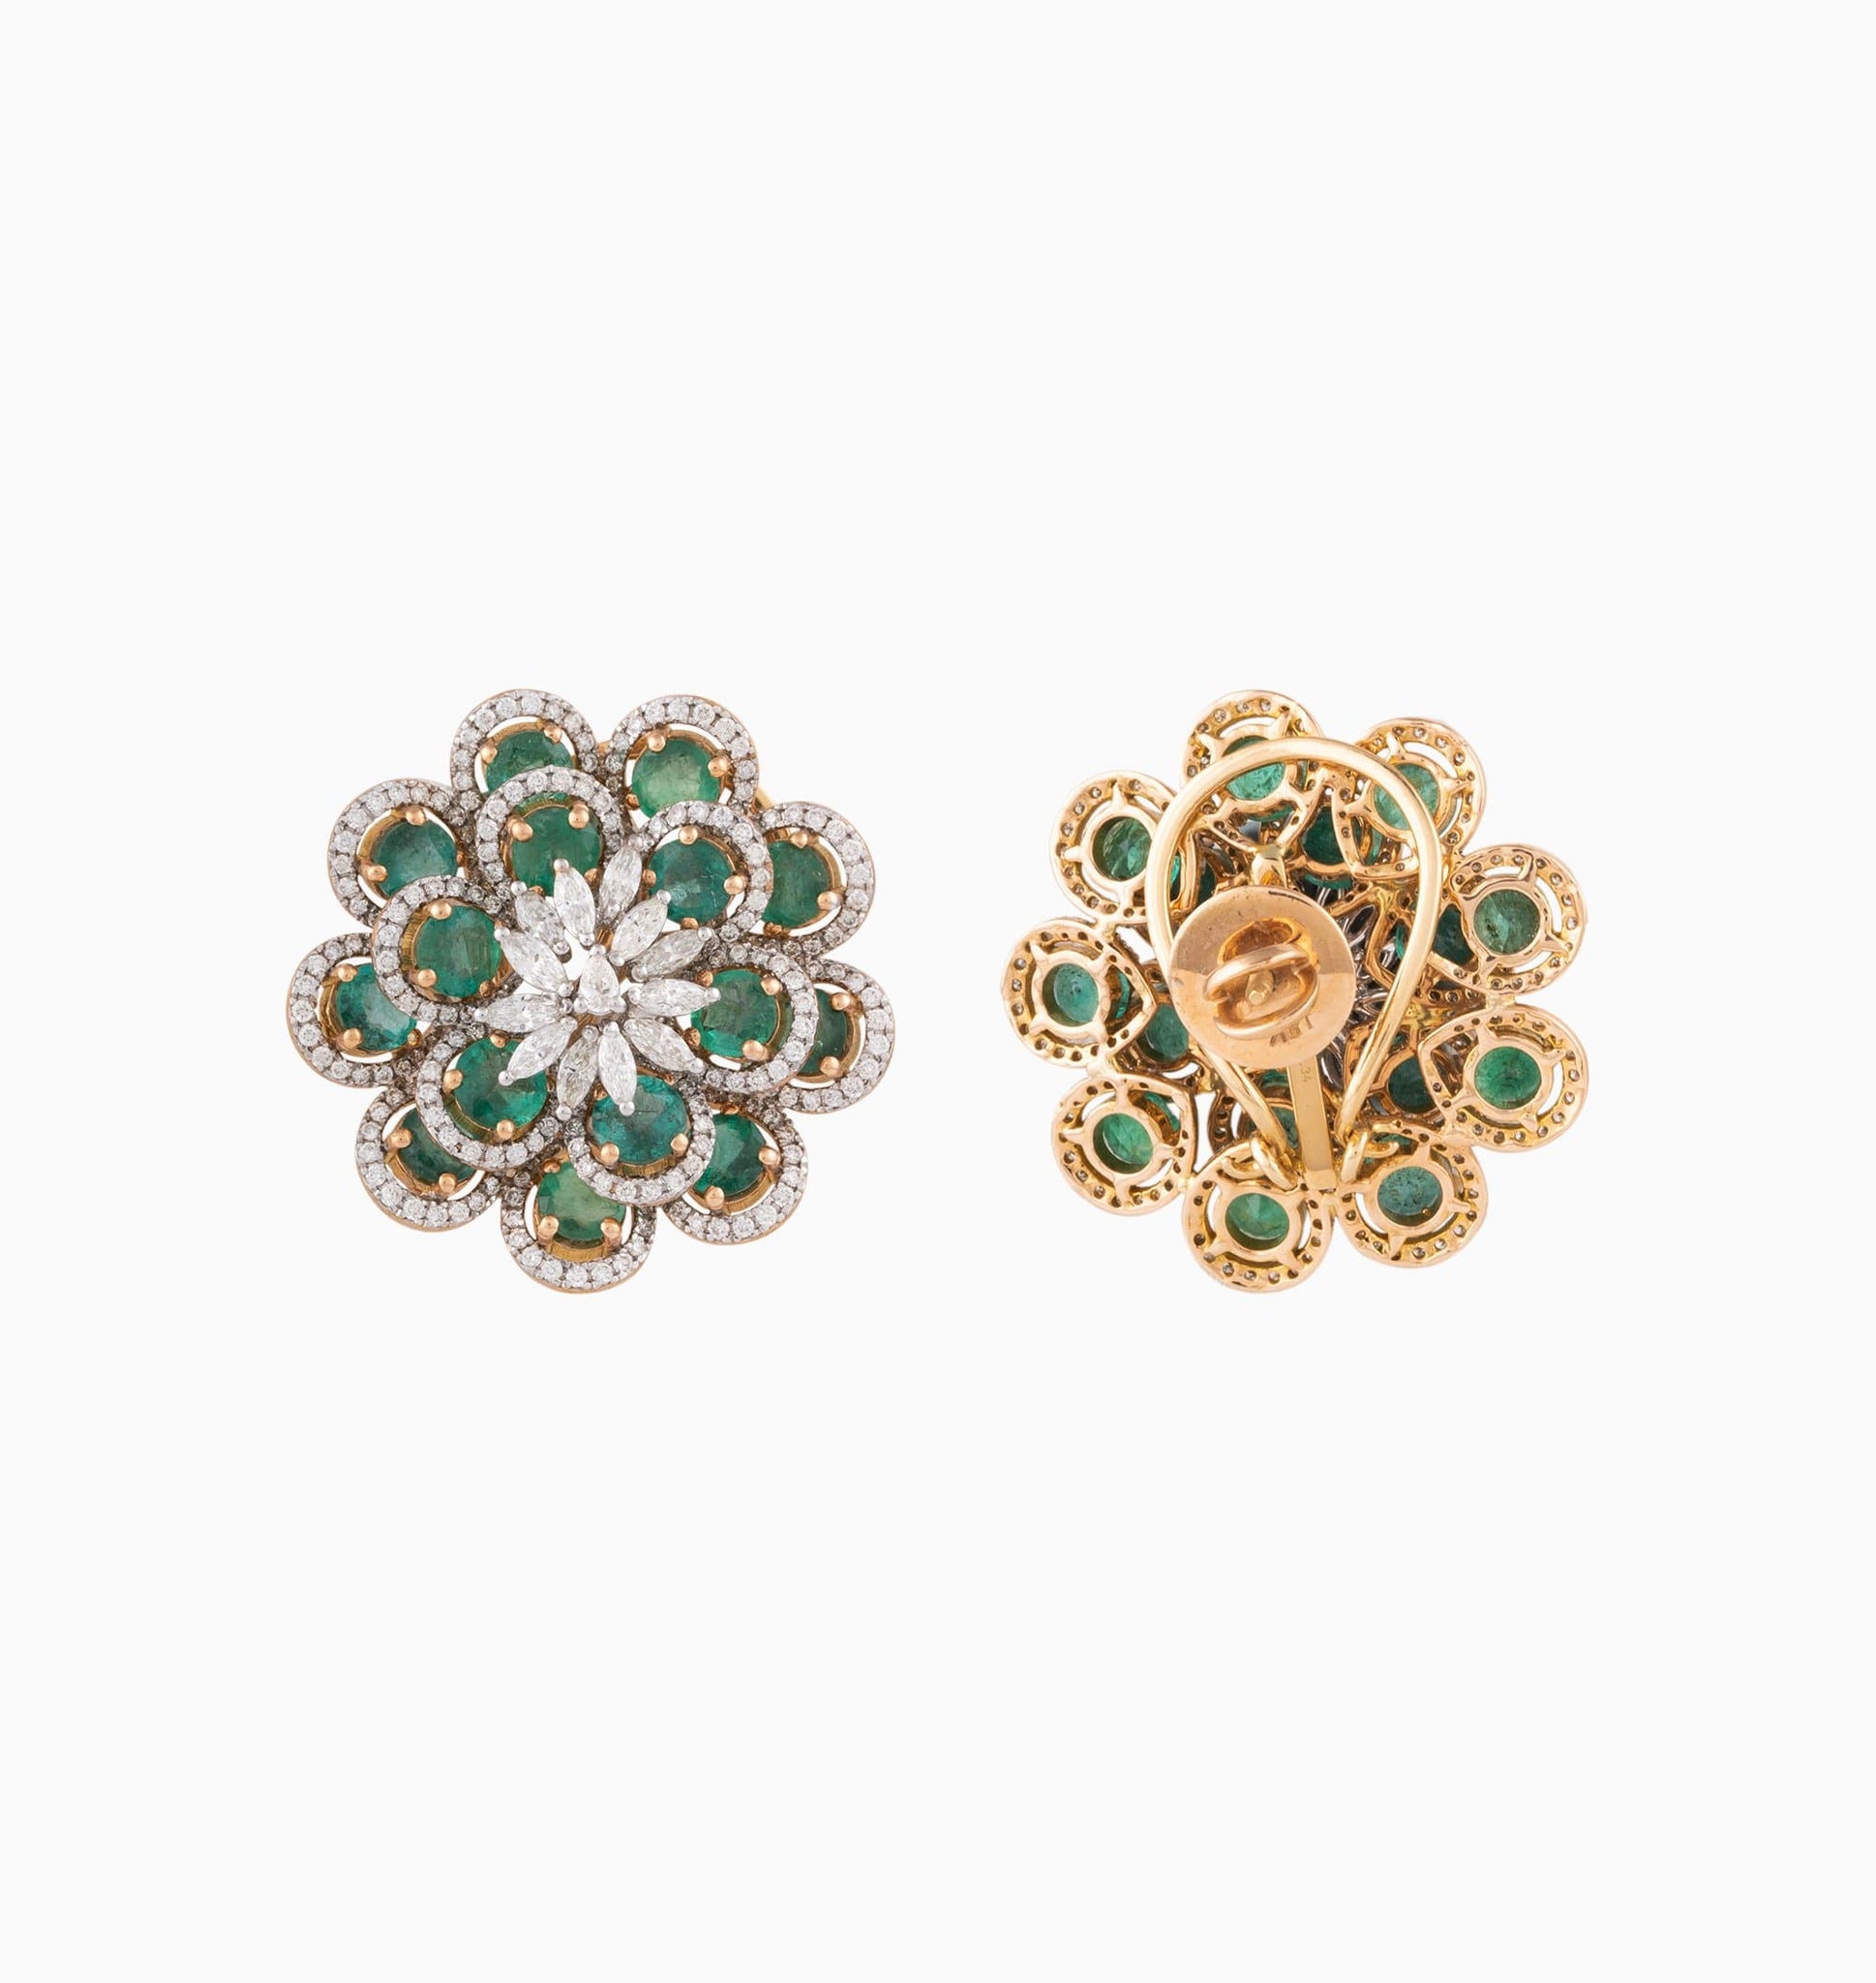 Earring Pair with Round Cut Emerald, Round Cut and Marquise Cut Diamond - PGDE0216